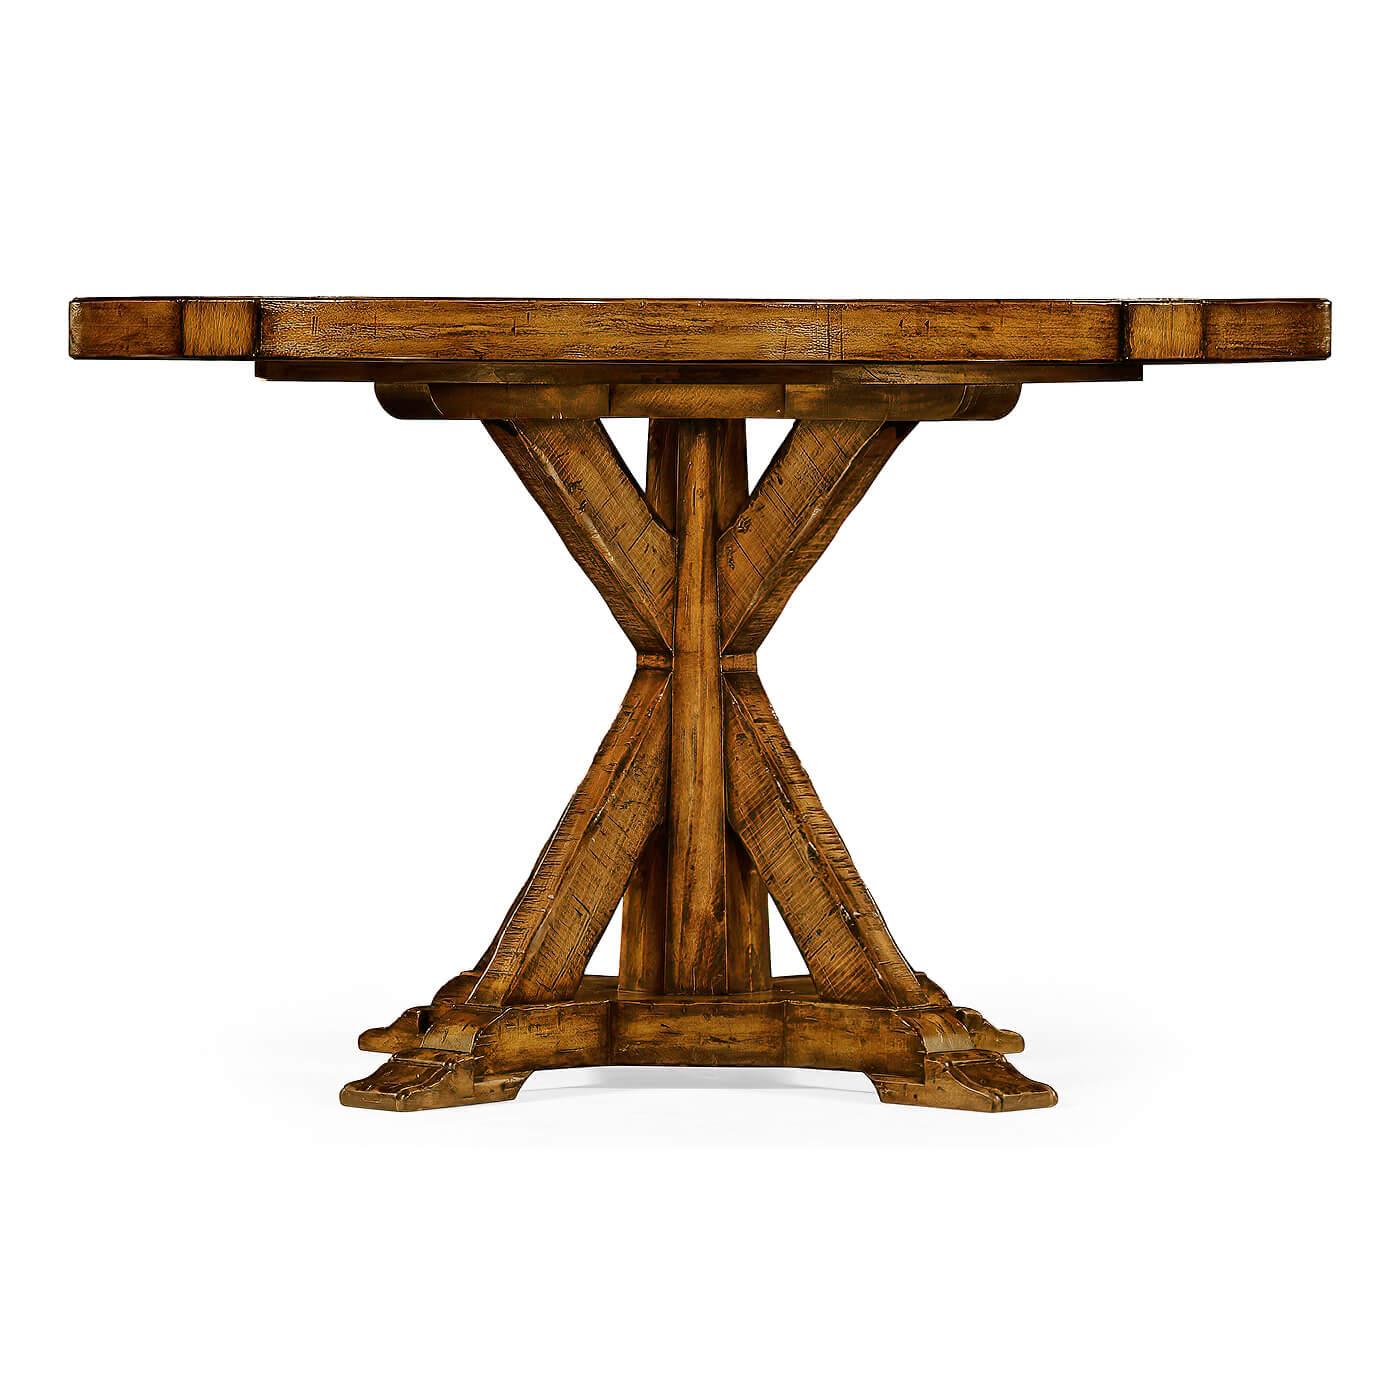 A round dining table finished in a warm walnut color with a rustic finish showing exposed saw marks and set on a bracketed country kitchen base.

Dimensions: 48